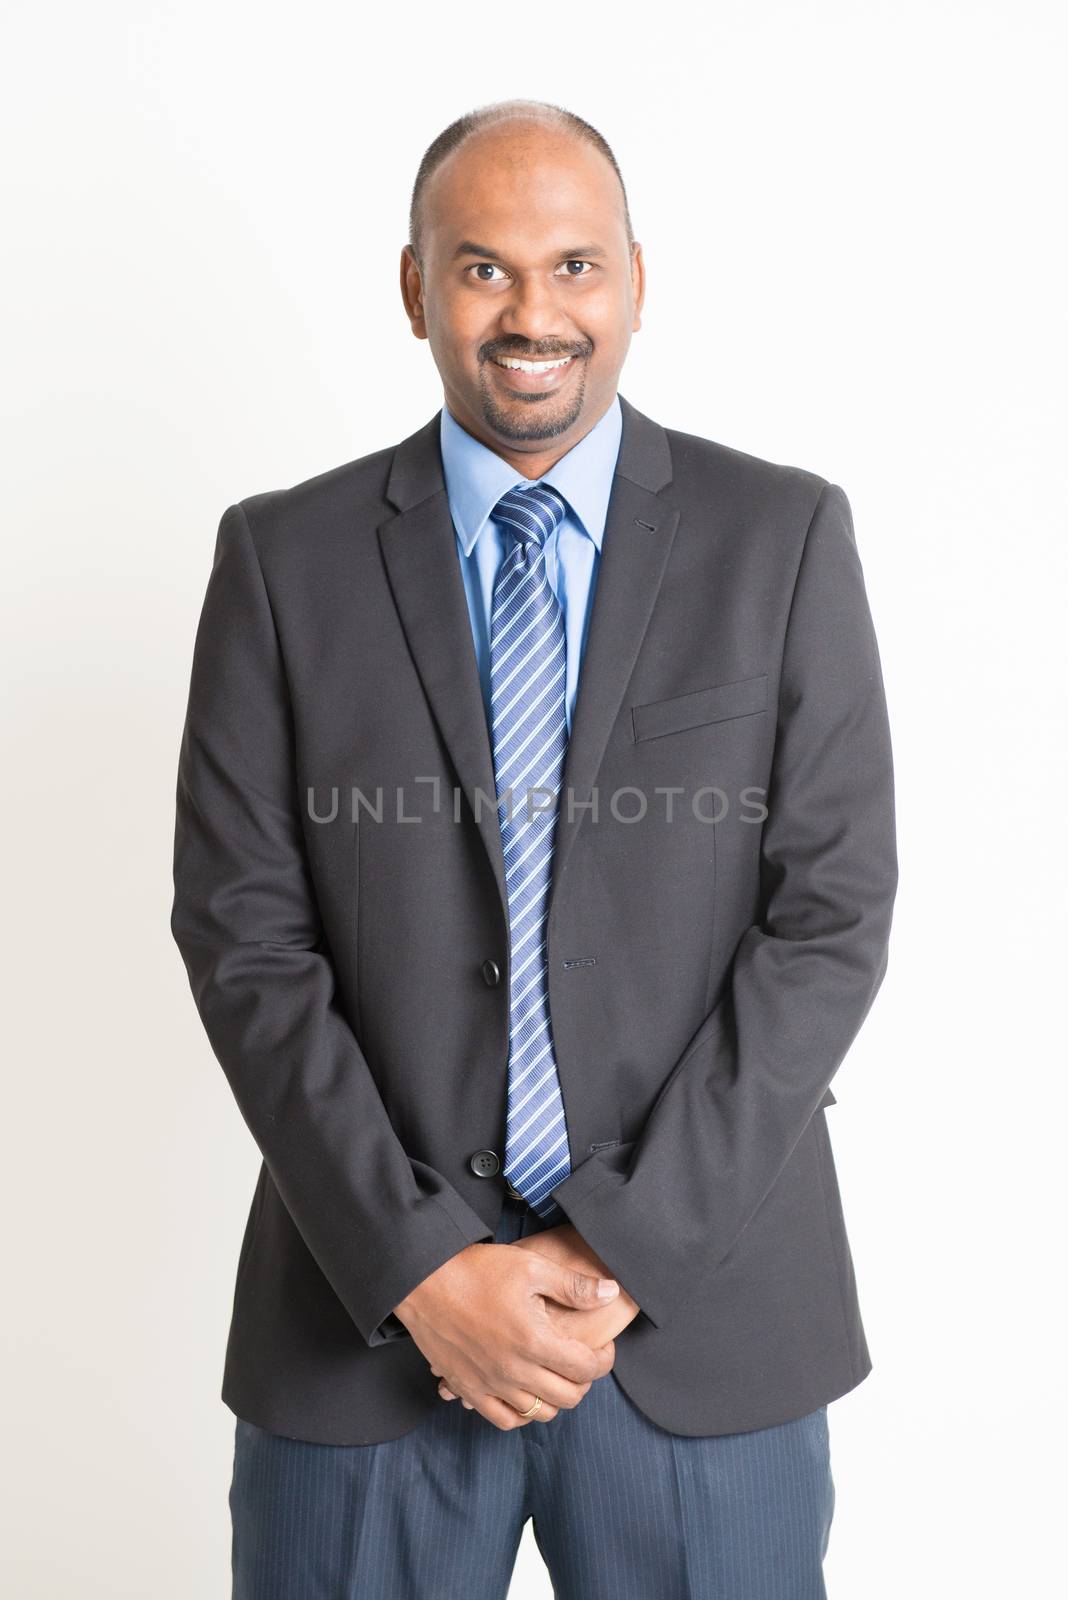 Friendly Indian businessman in formal suit looking at camera, standing on plain background.